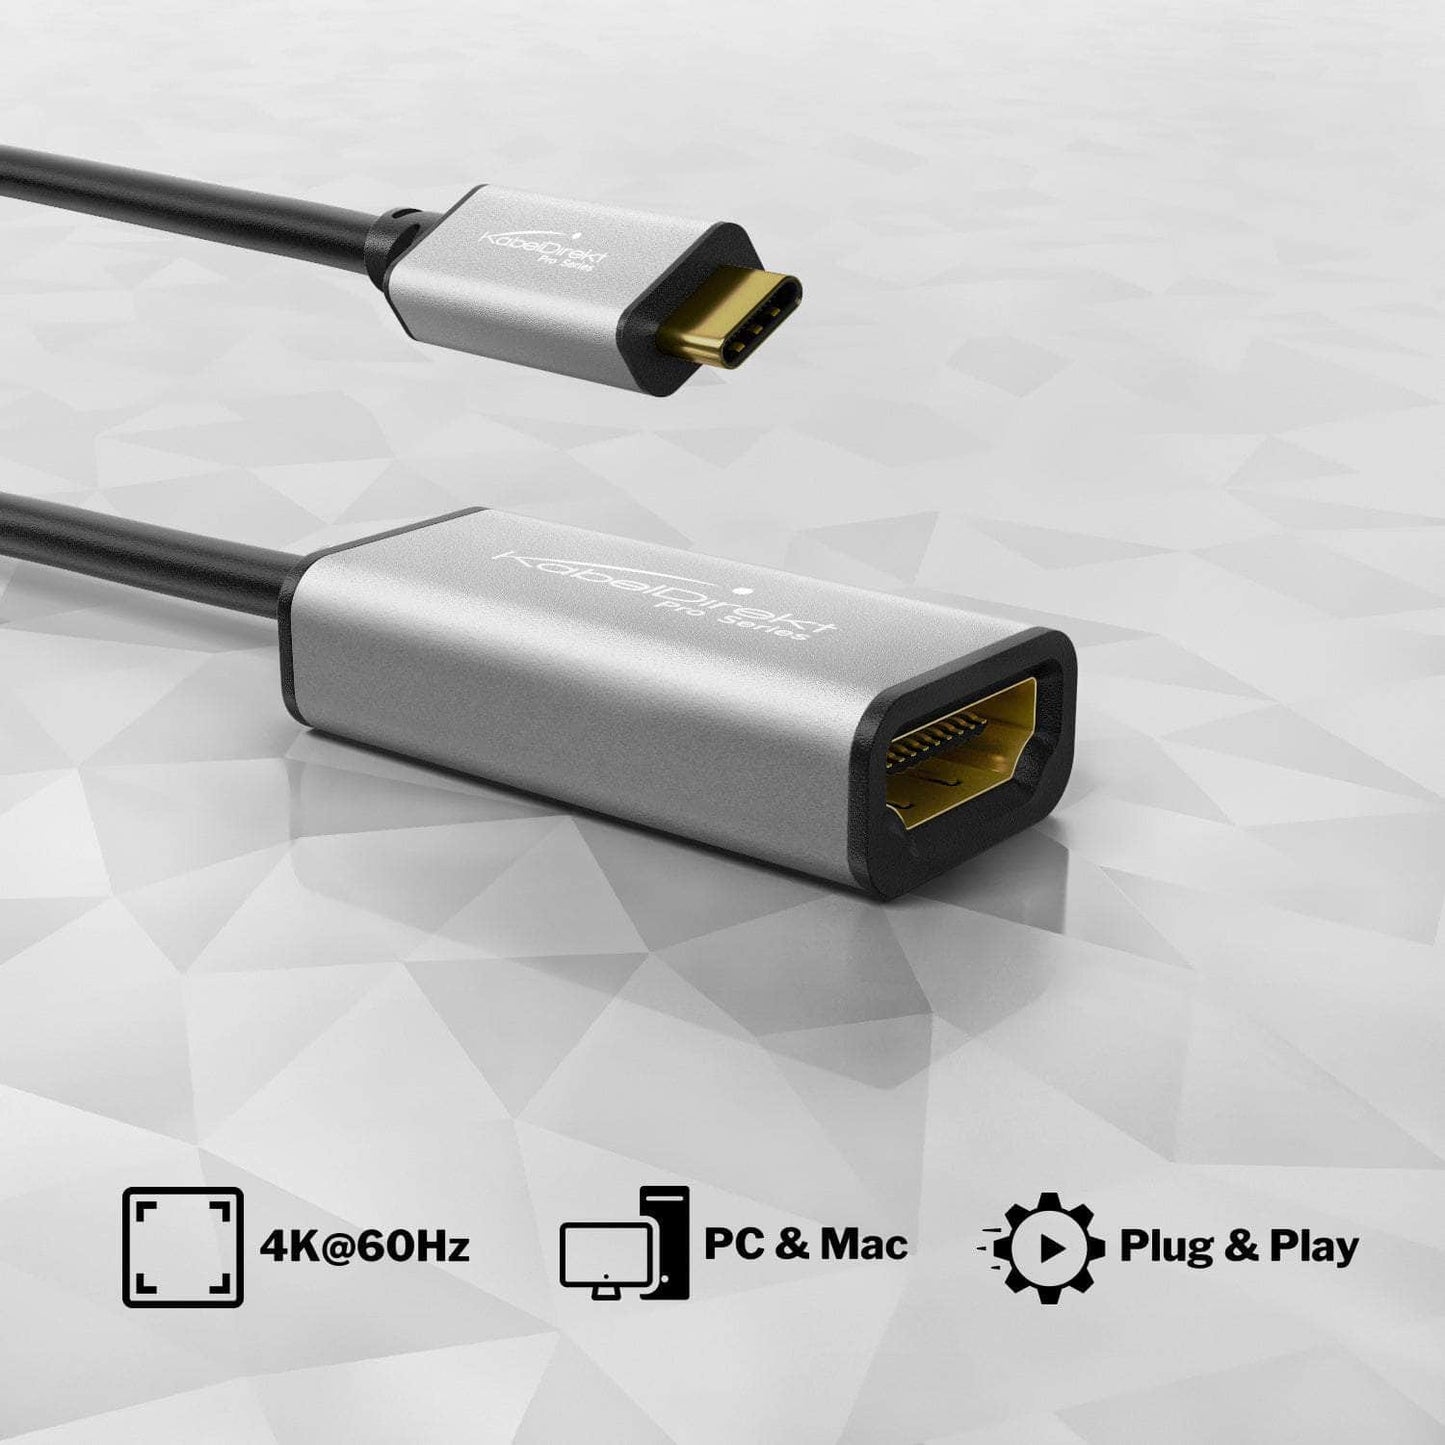 USB C to HDMI adapter, 0.15m, supports resolutions up to 4K/60Hz